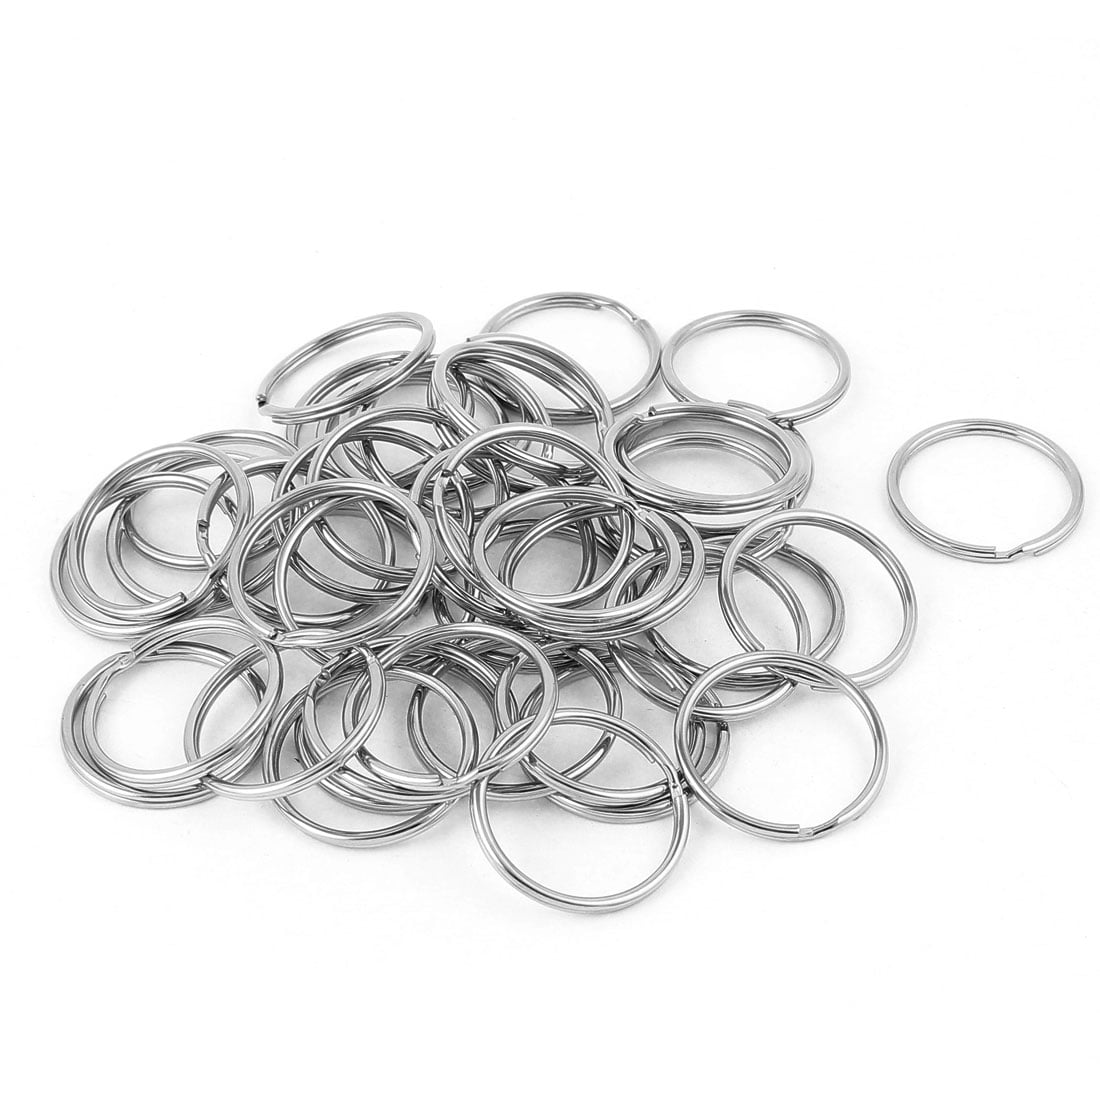 Wholesale Lots Silver Tone Stainless Steel Open Jump Rings 8mmx1.5mm